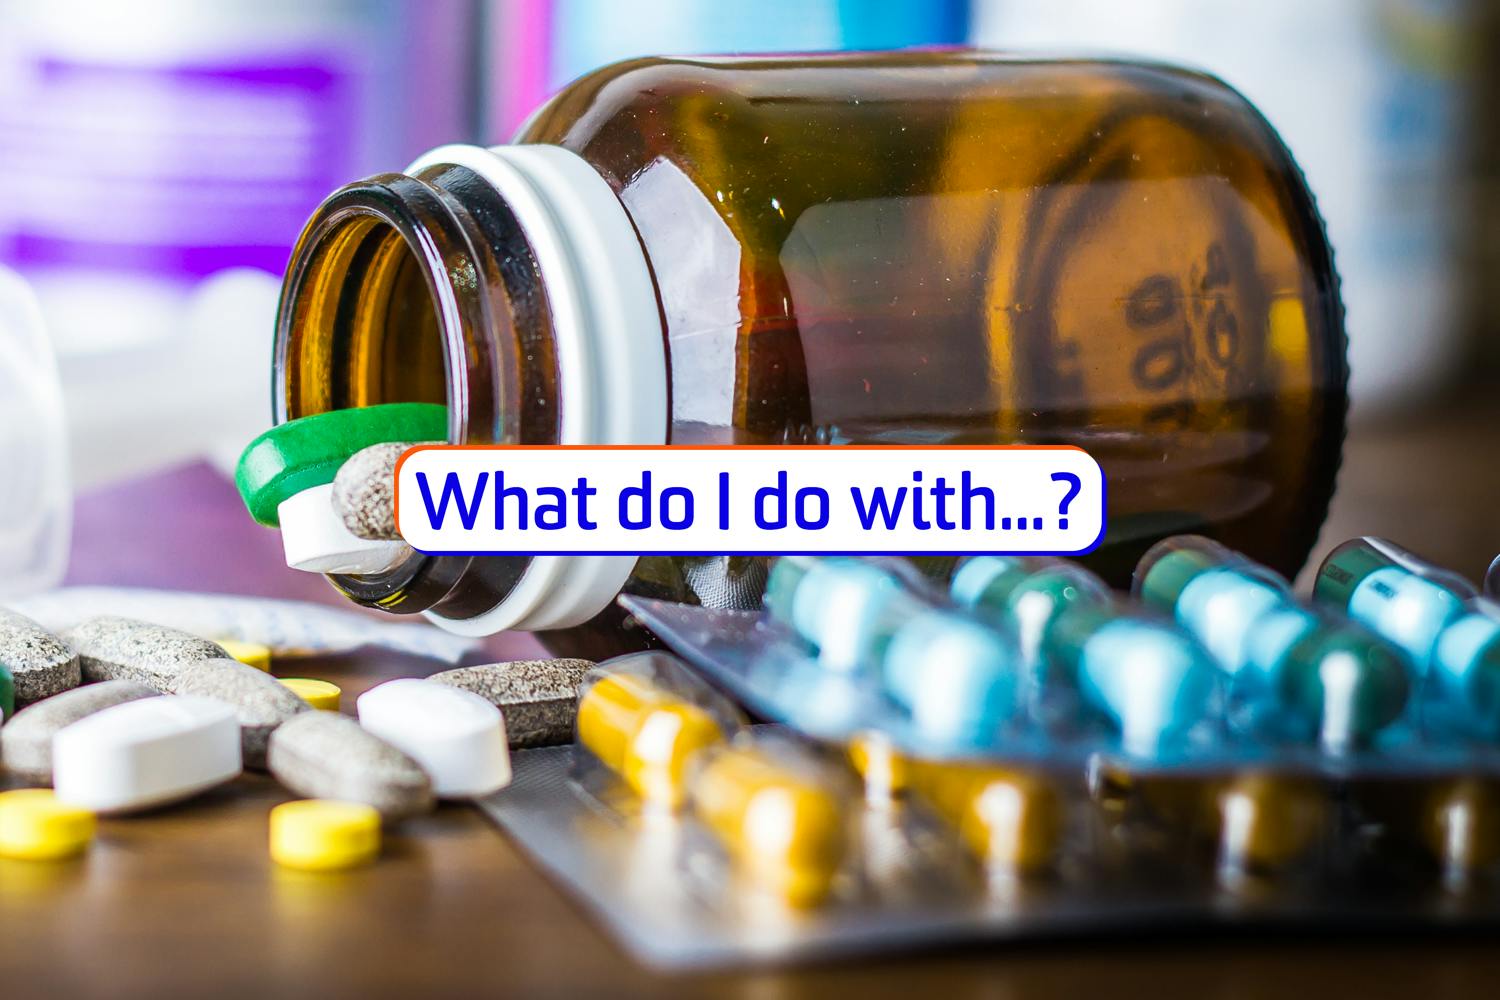 What do I do with expired or unused medicine?